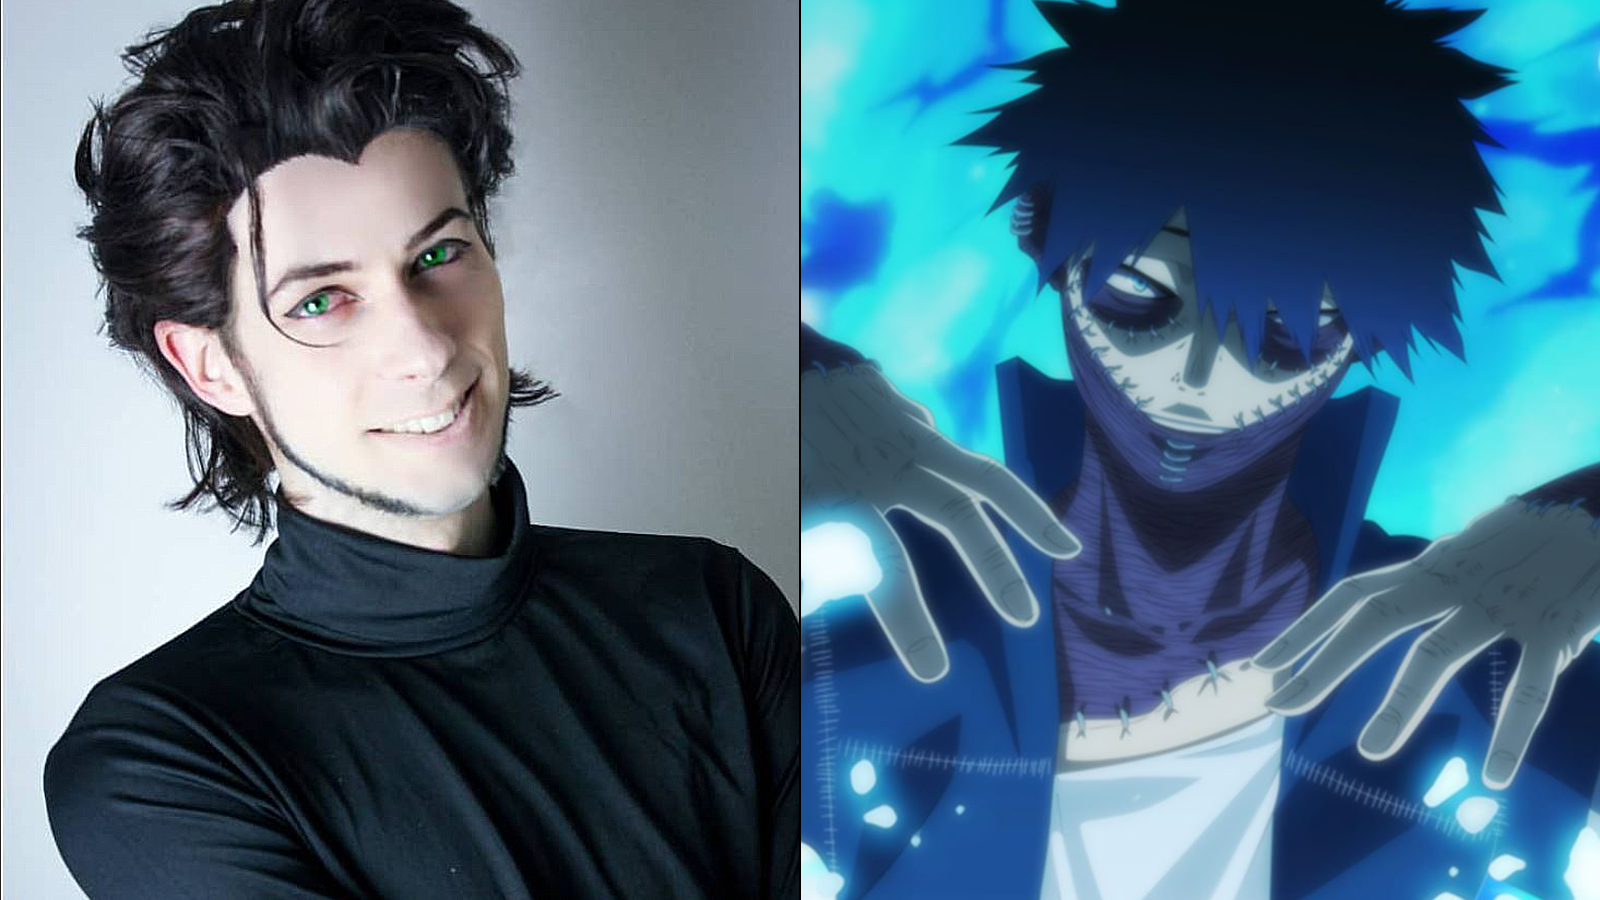 My Hero Academia cosplayer shows off his villainous side as Dabi